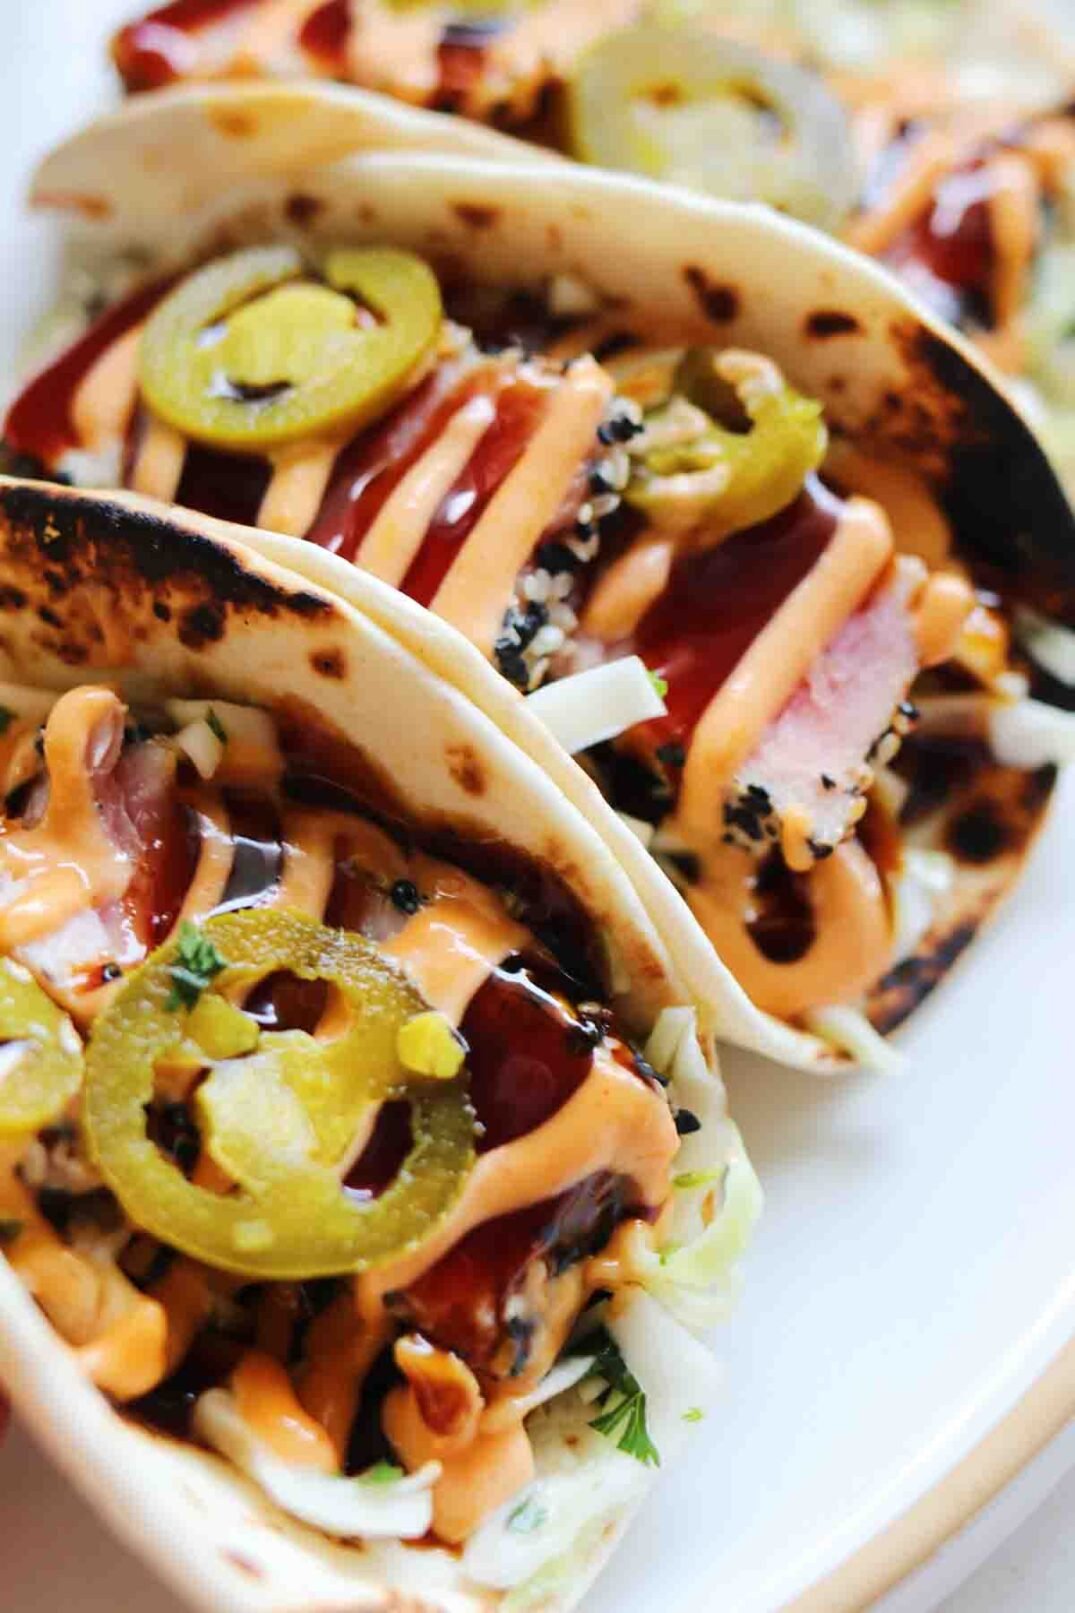 3 folded tuna tacos drizzled with sauce and green pickled jalapenos.